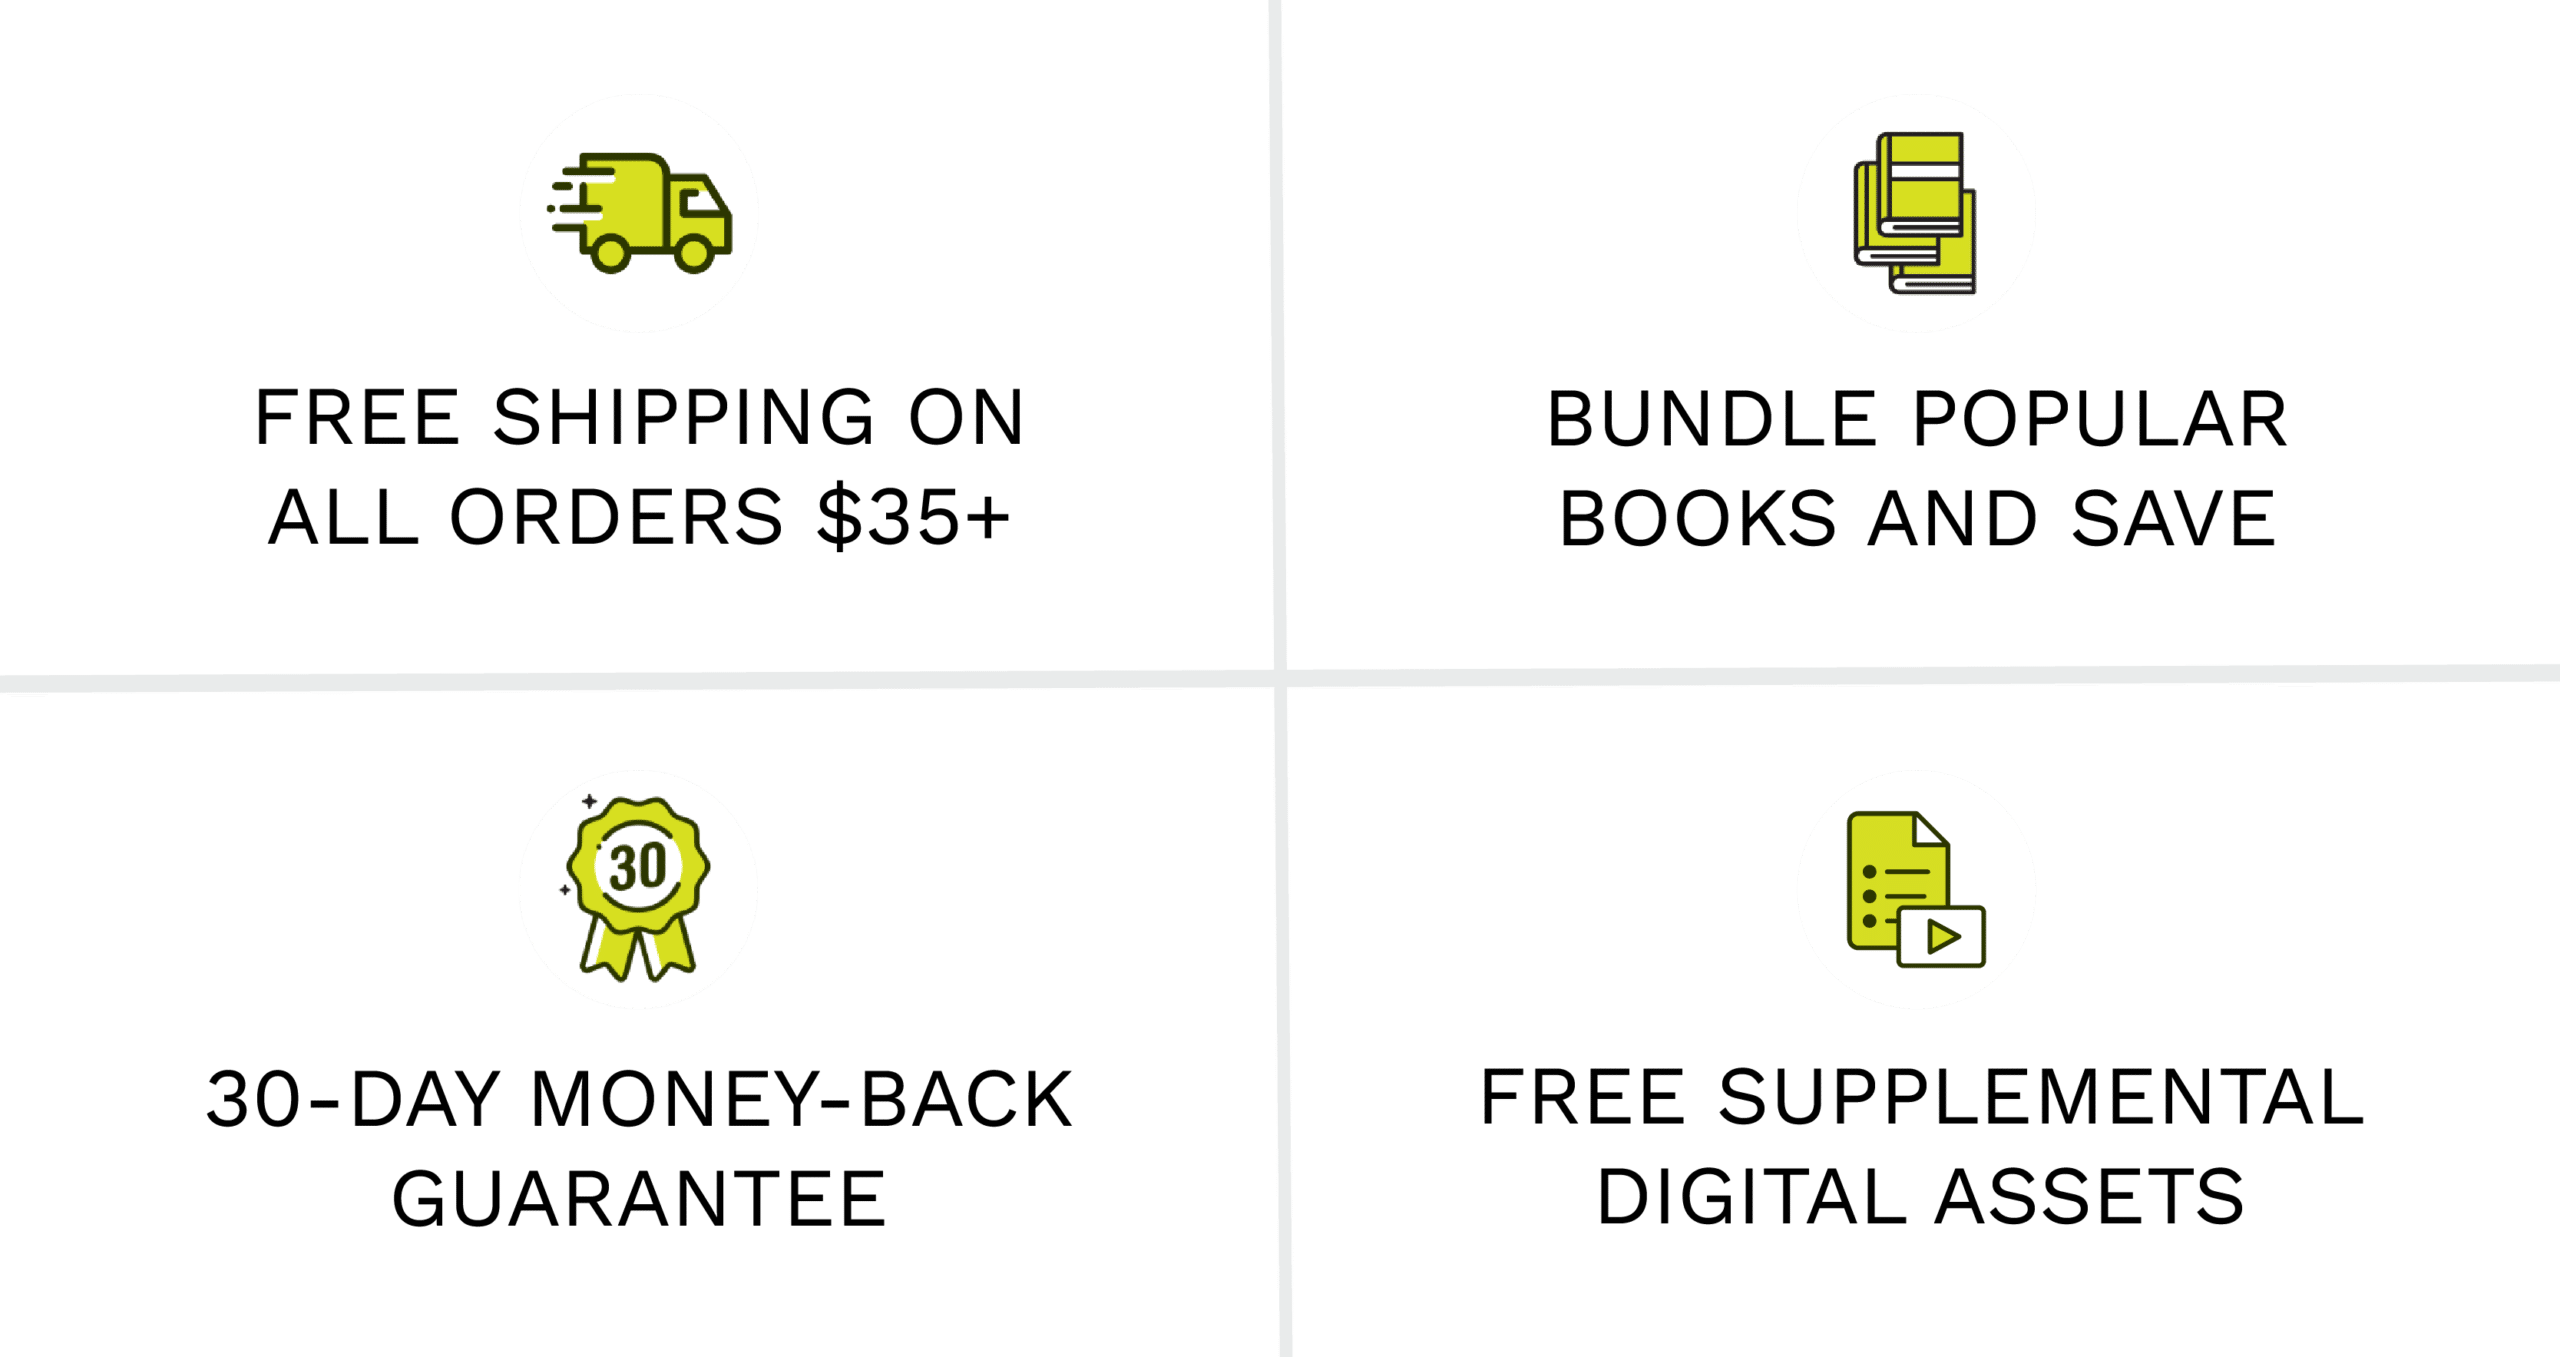 When you shop on QuickStartGuides.com enjoy free domestic shipping on all orders $35+, save when you bundle popular books, and get free supplemental digital assets with every book you purchase. Here's the best part - your order is protected by our no questions asked 30-day money-back guarantee!